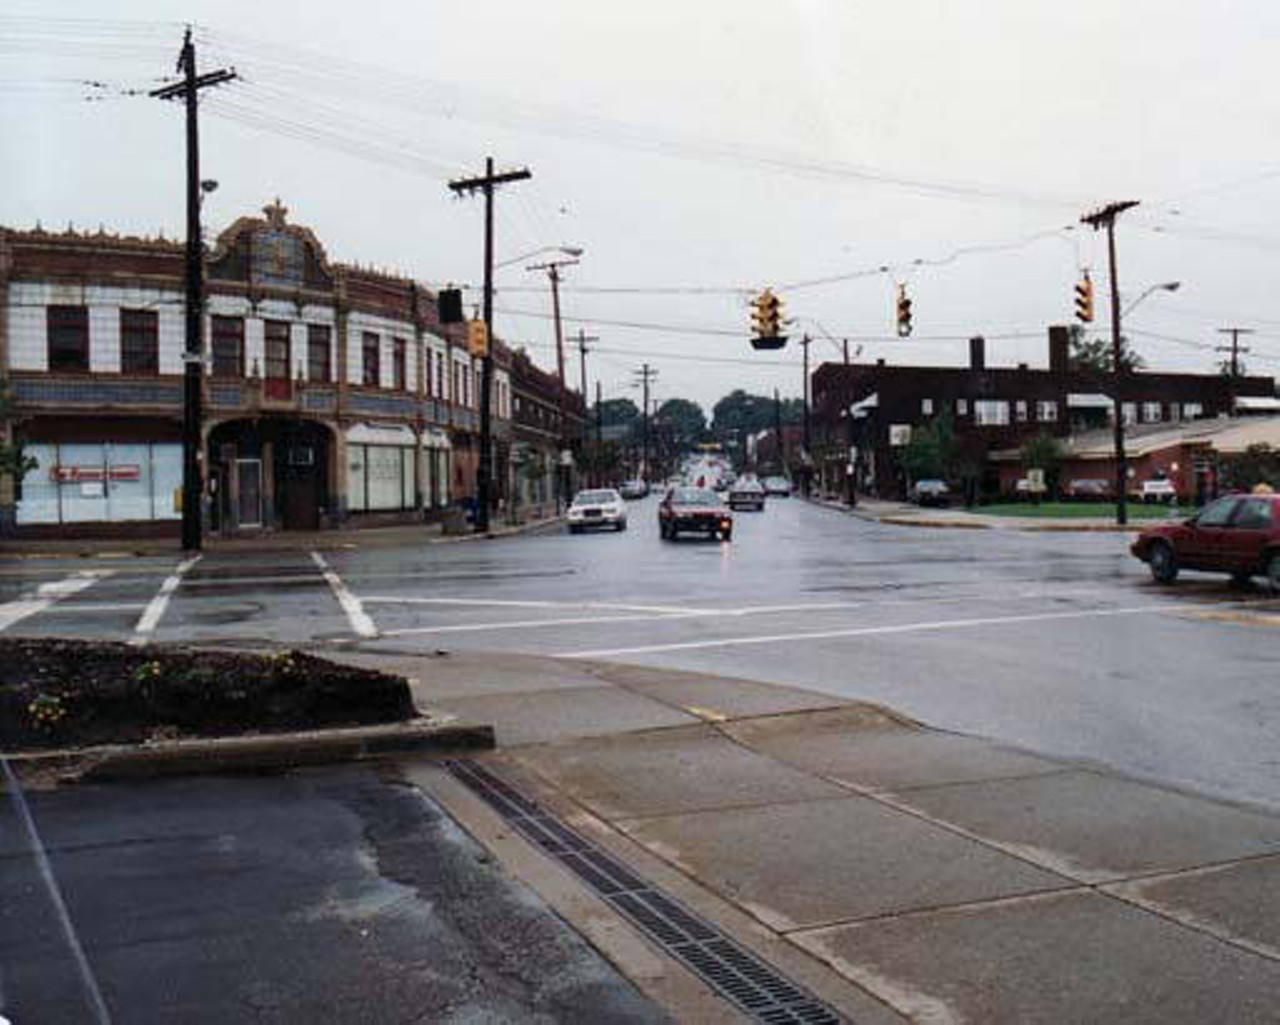 Coventry commercial district (Cleveland Heights, Ohio). 1985